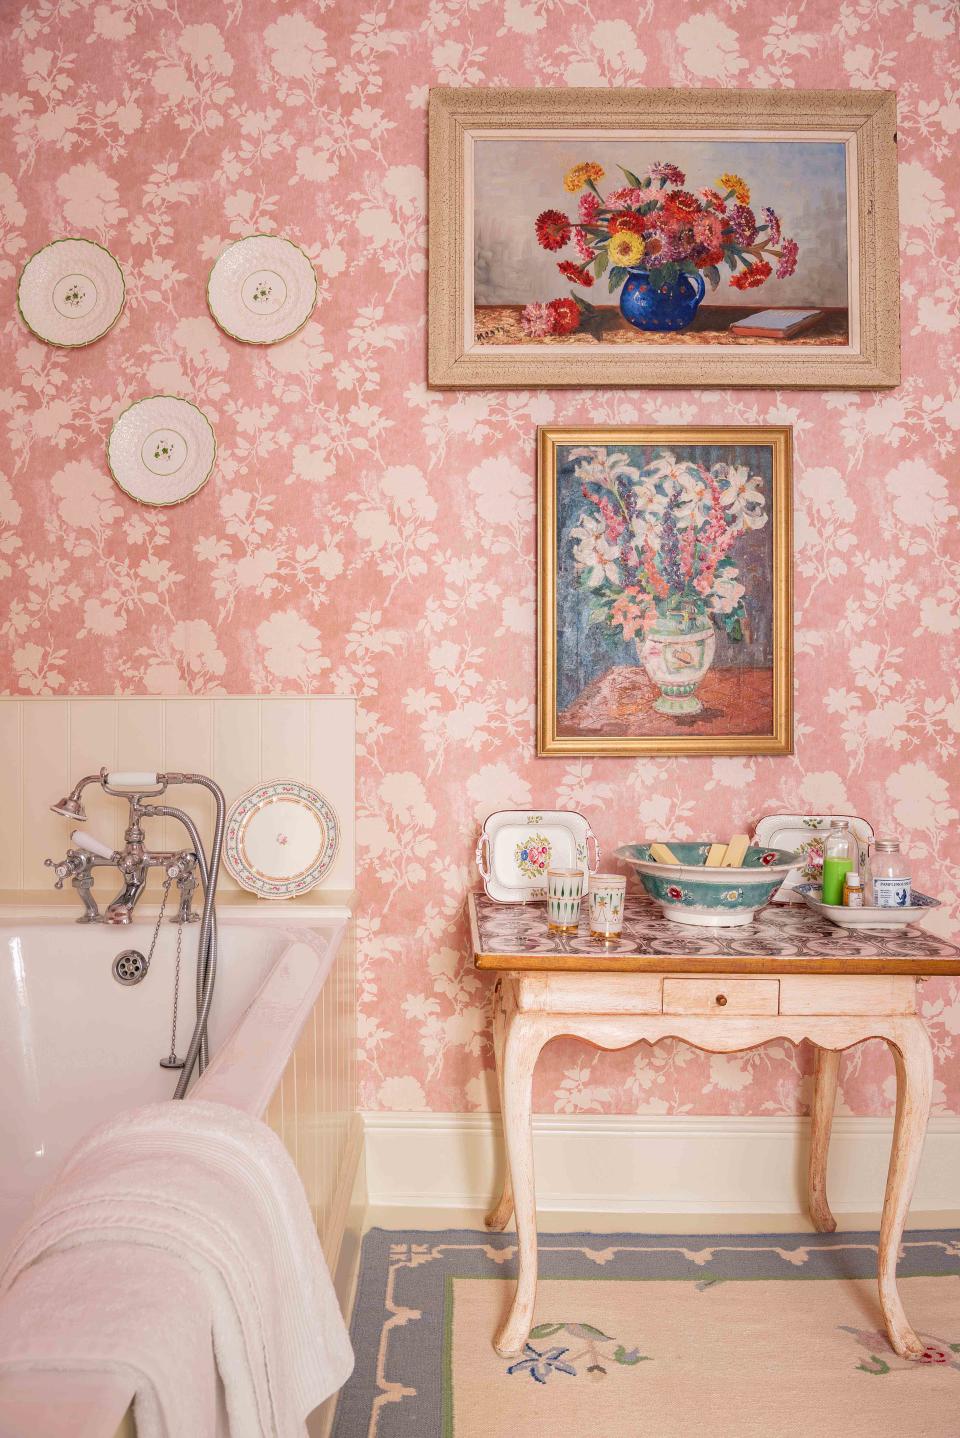 <p> For a country cottage look, opt for a pretty wallpaper and keep it simple by choosing a two tone design – then it can act as a background for vintage paintings and decorative plates.  </p> <p> This Flowerberry Pink wallpaper is from a selection designed by Penny Morrison. Its floral silhouettes sit perfectly on the slightly worn pink background.  </p>